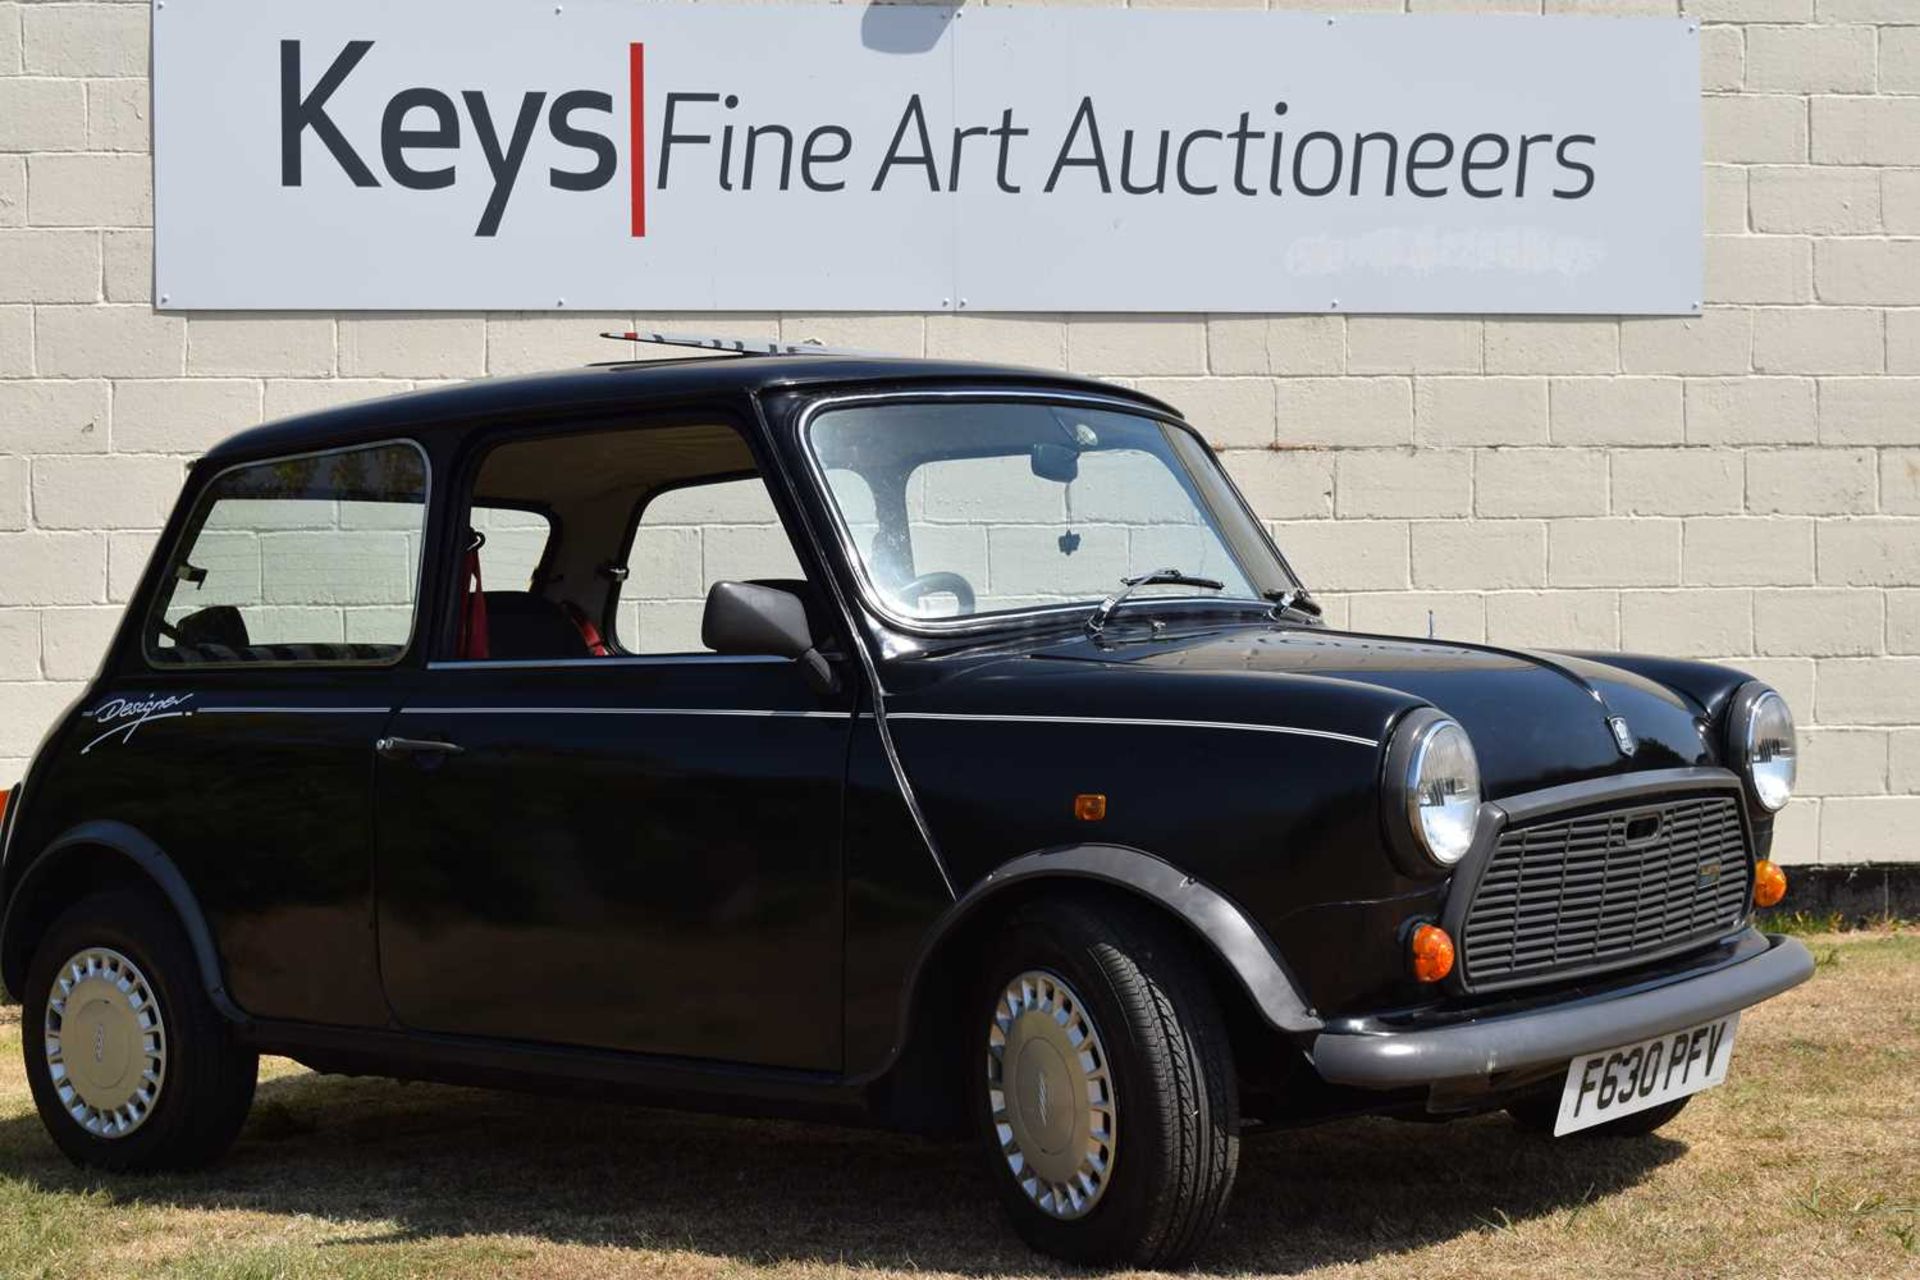 1988 Austin Mini Designer Mary Quant in Black. The Mini needs no introduction. One of the most - Image 2 of 10